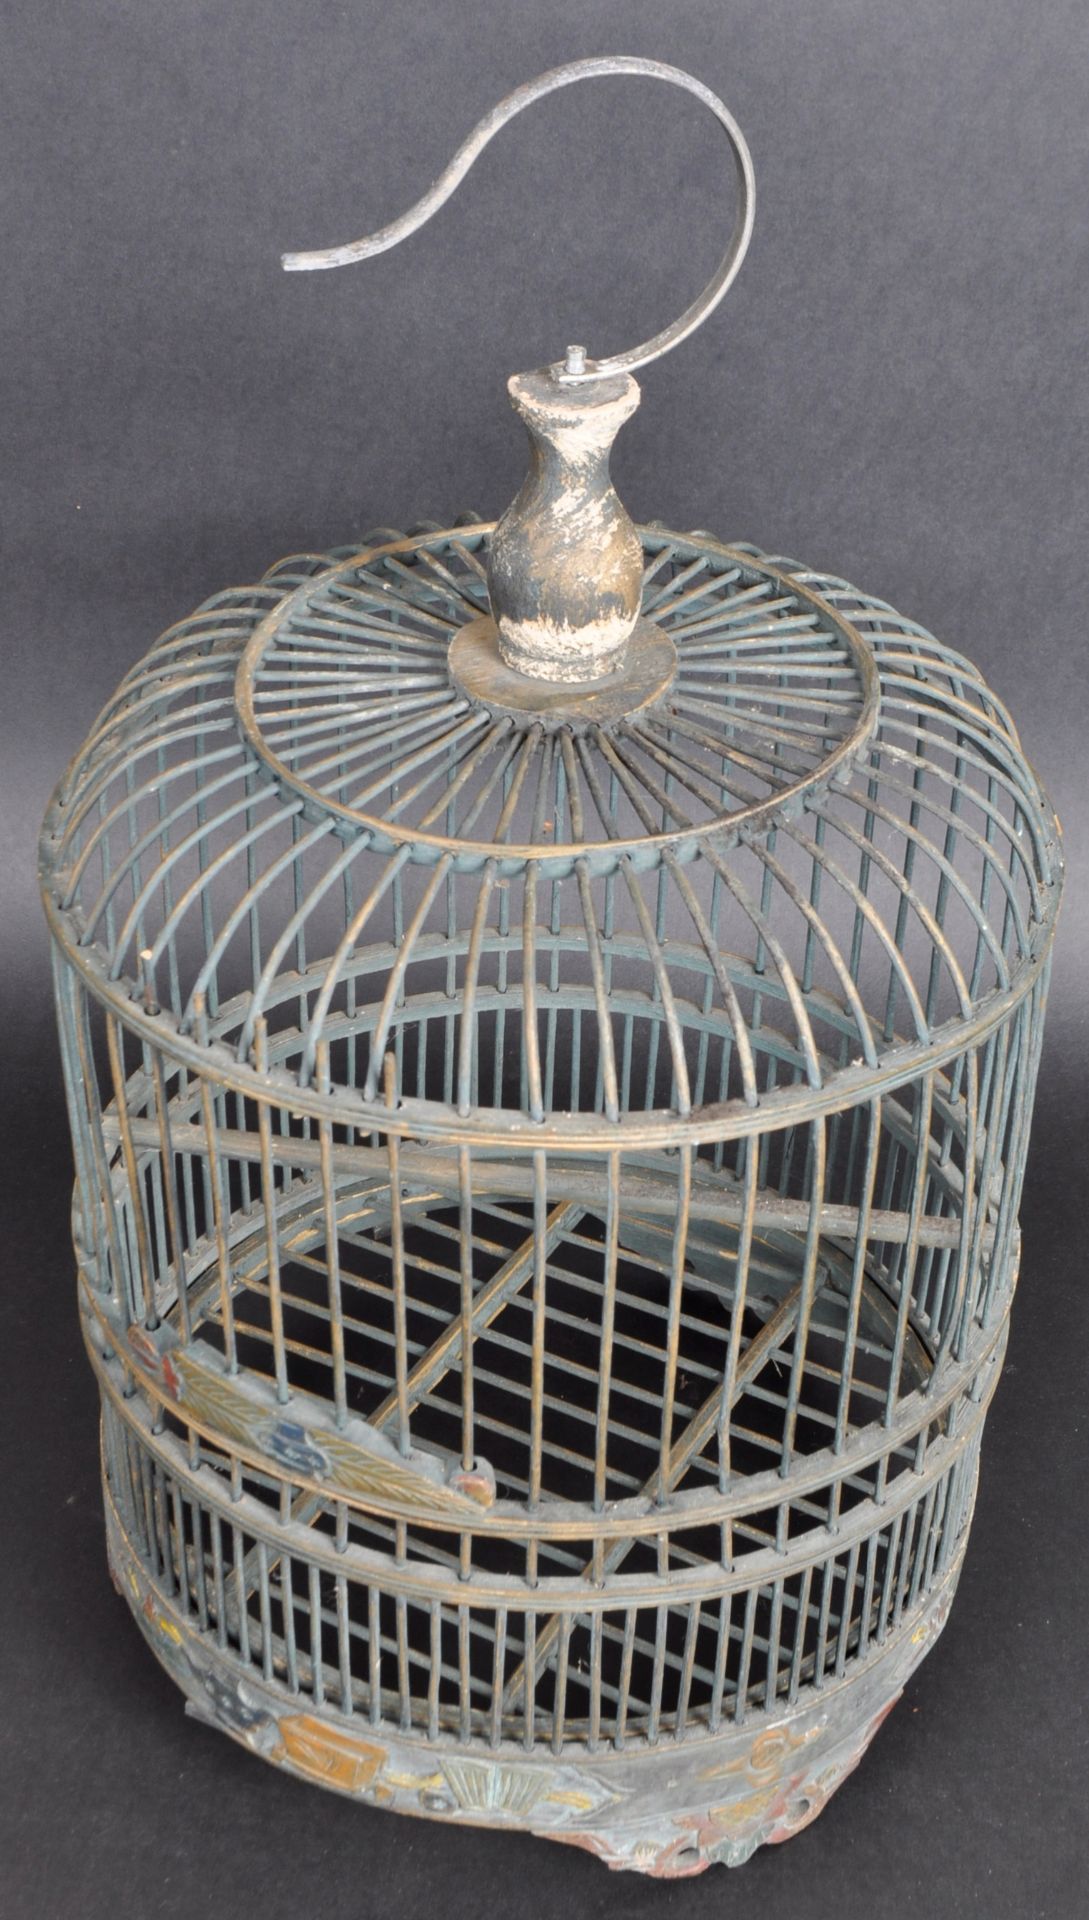 EARLY 20TH CENTURY CHINESE WOODEN BIRDCAGE - Image 2 of 6